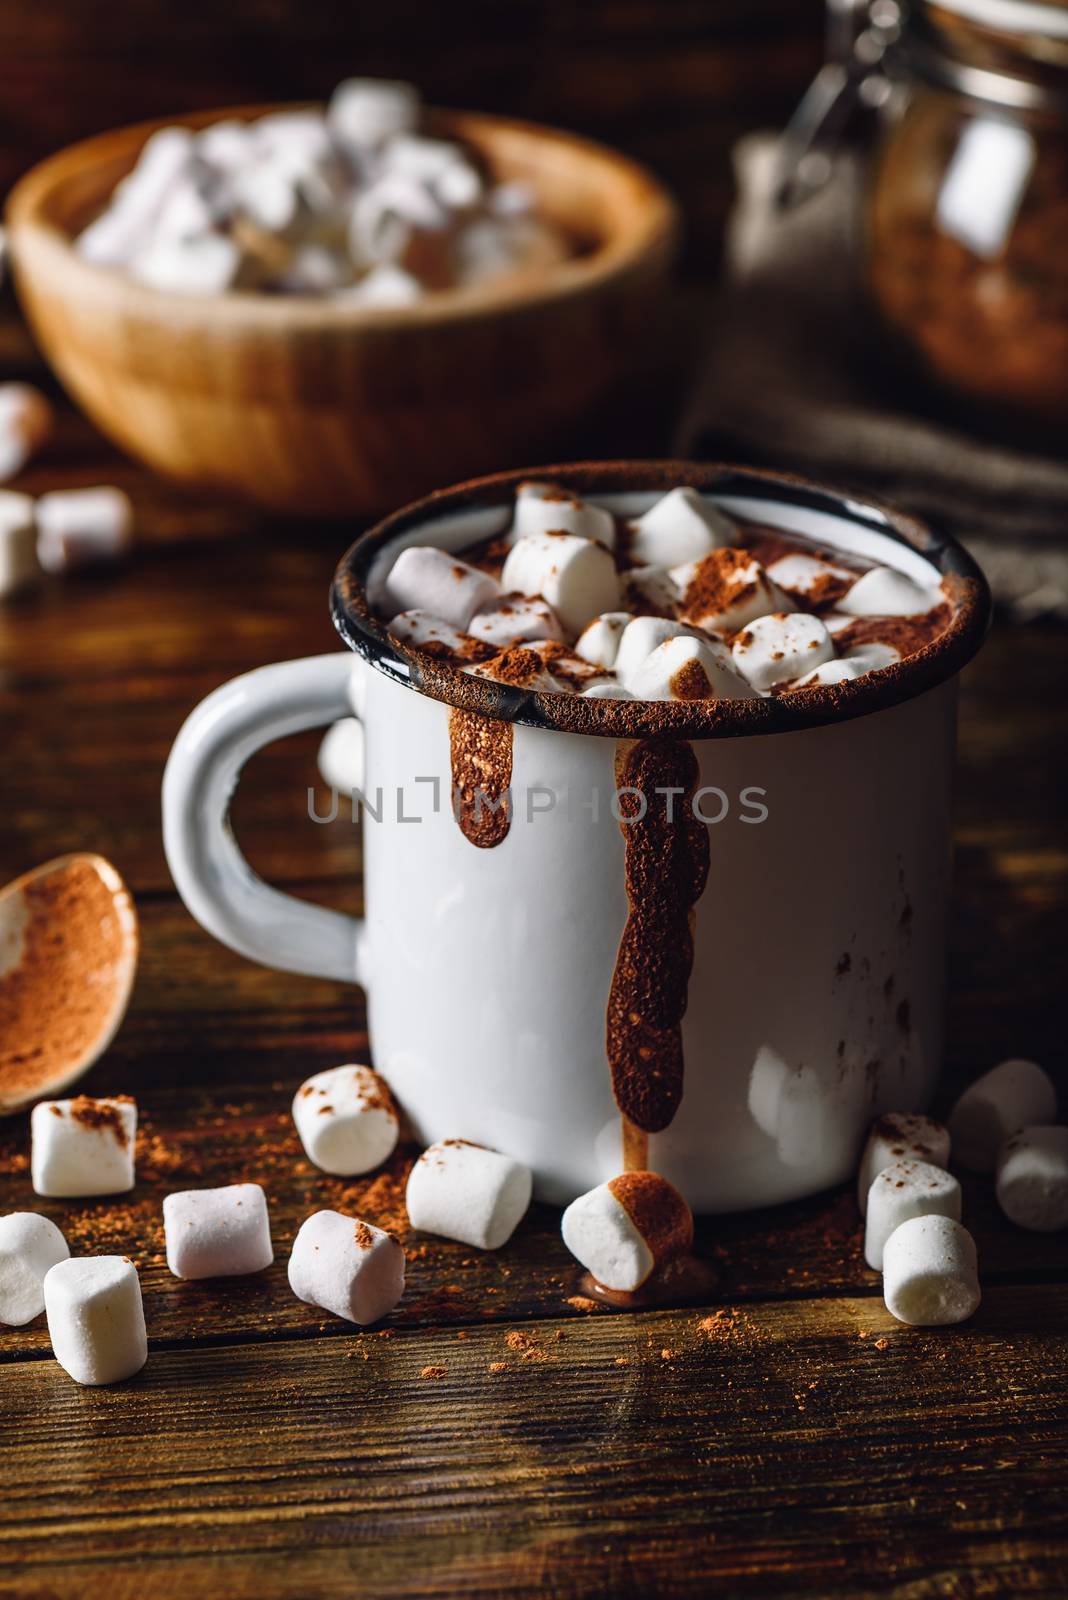 Cocoa Mug with Marshmallows. Jar of Cocoa Powder and Marshmallow Bowl on Backdrop. Vertical Orientation.